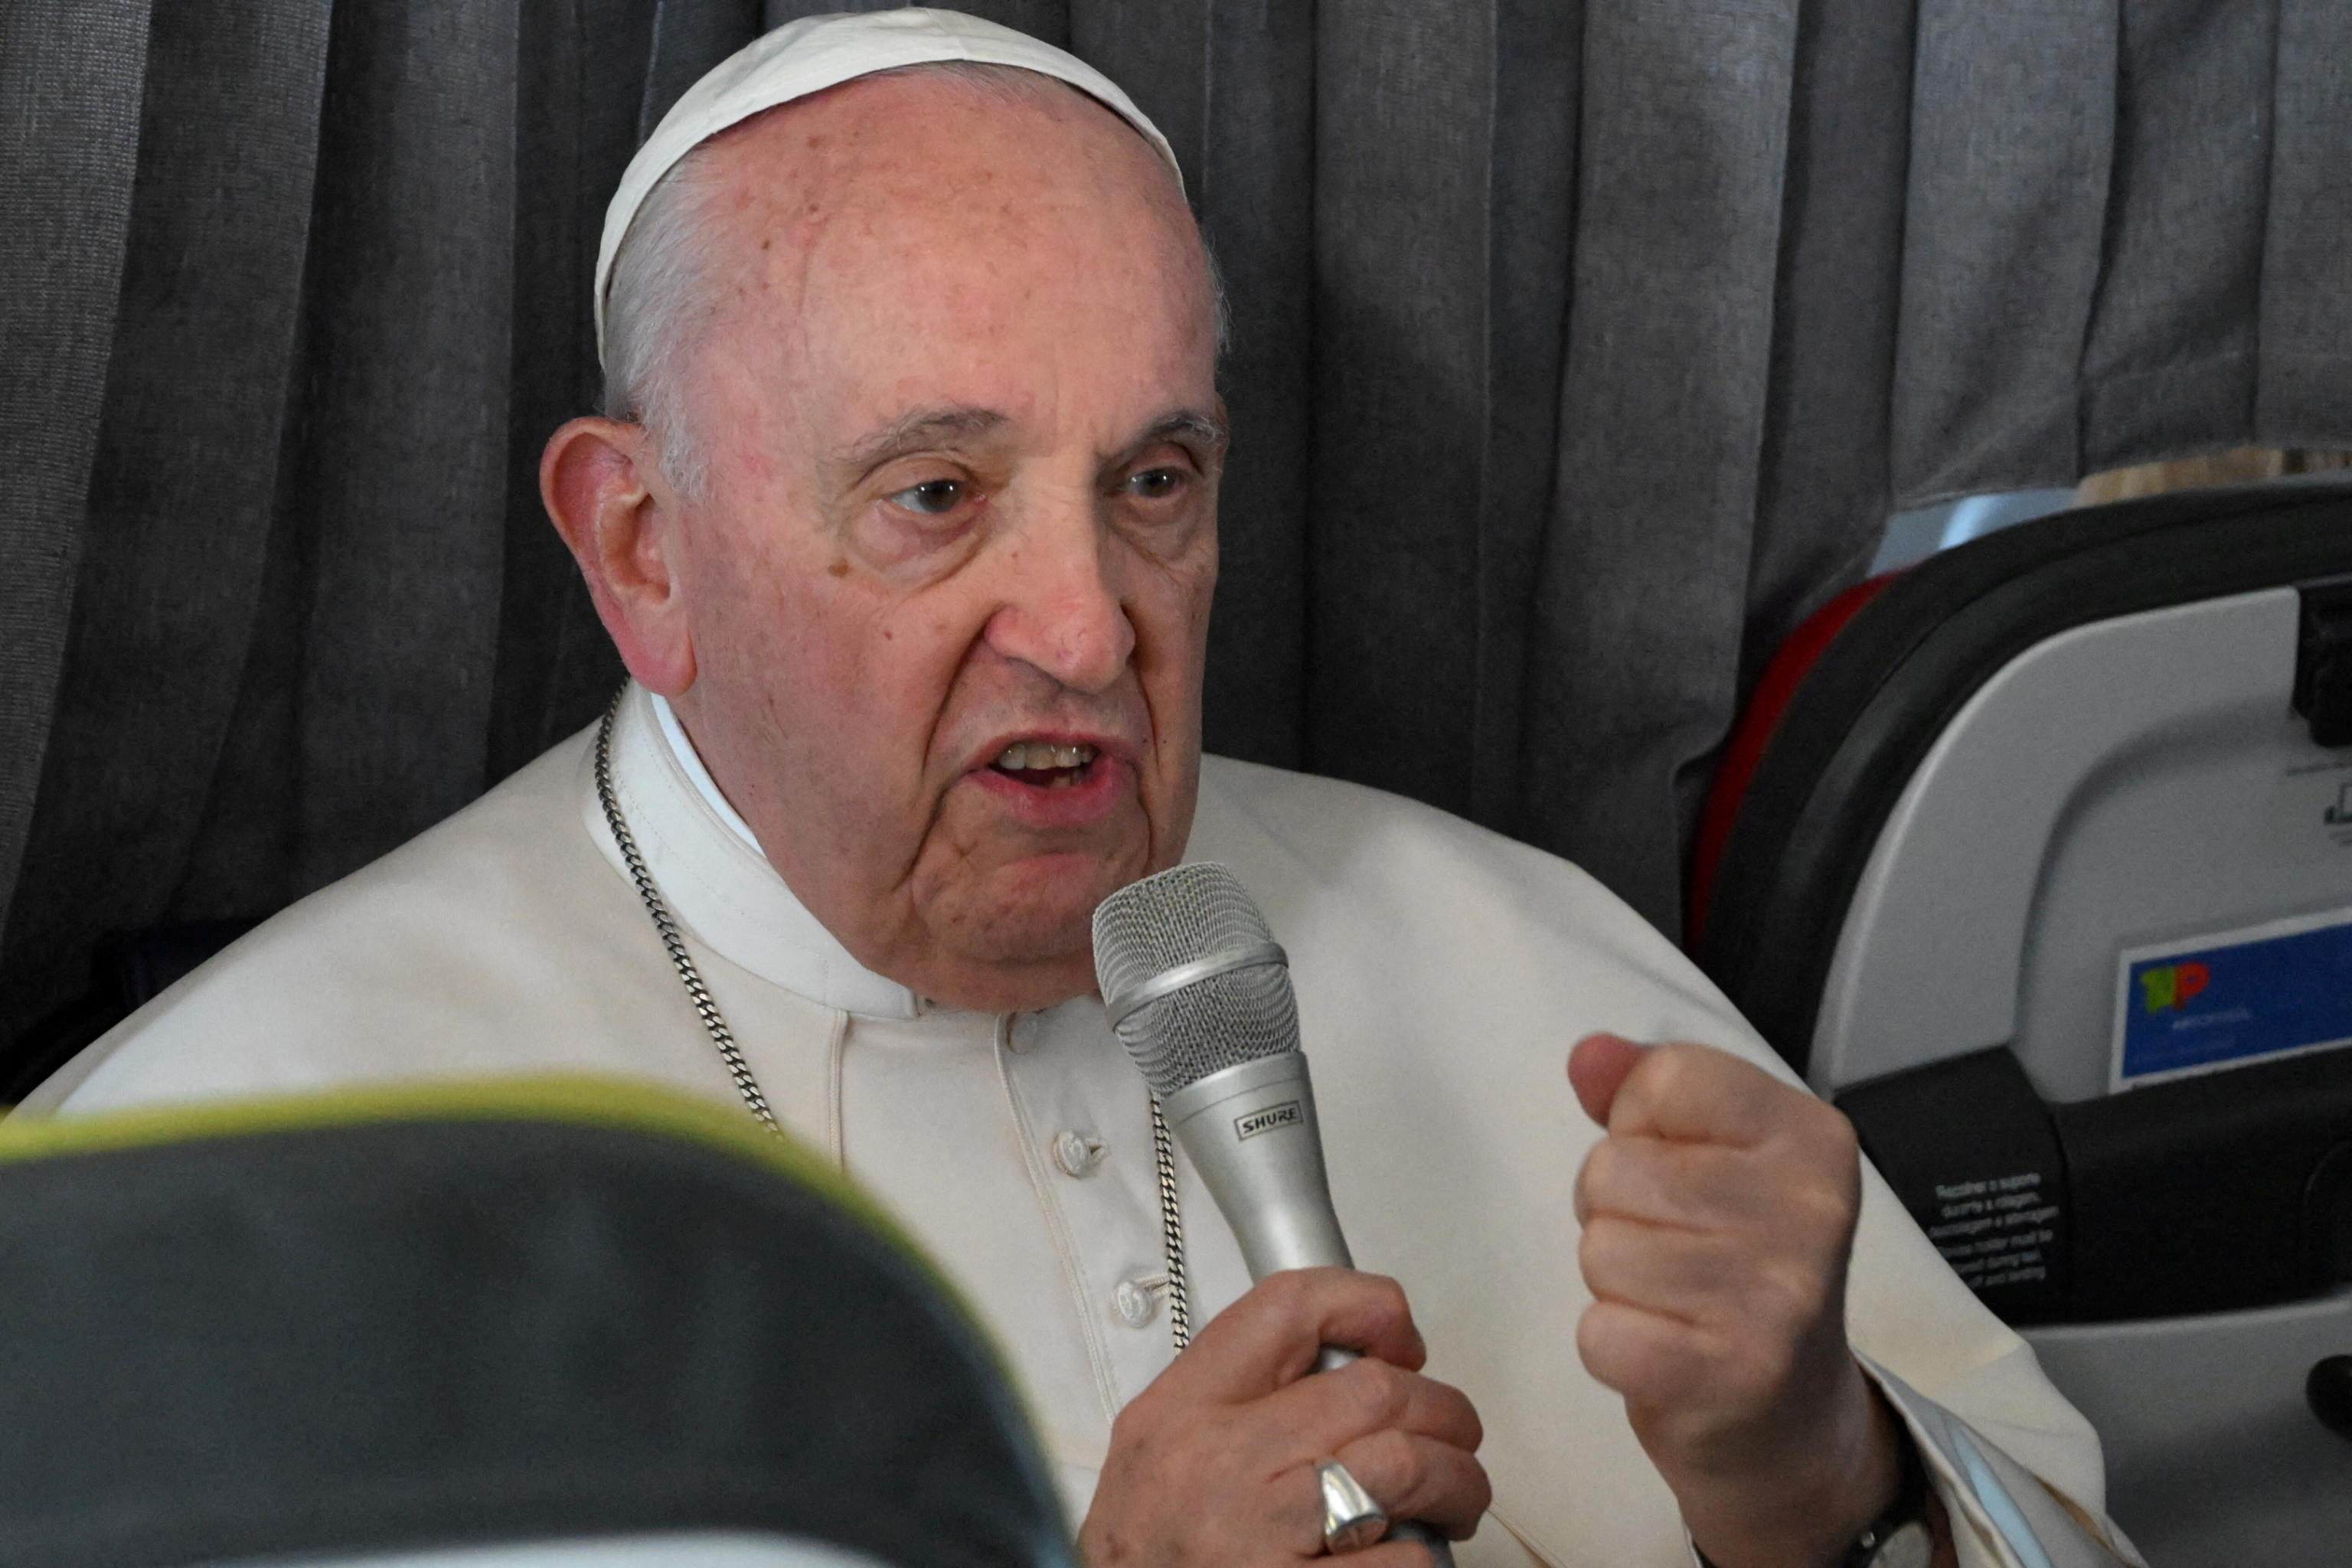 Pope Francis attends a press conference onboard a plane en route to Rome